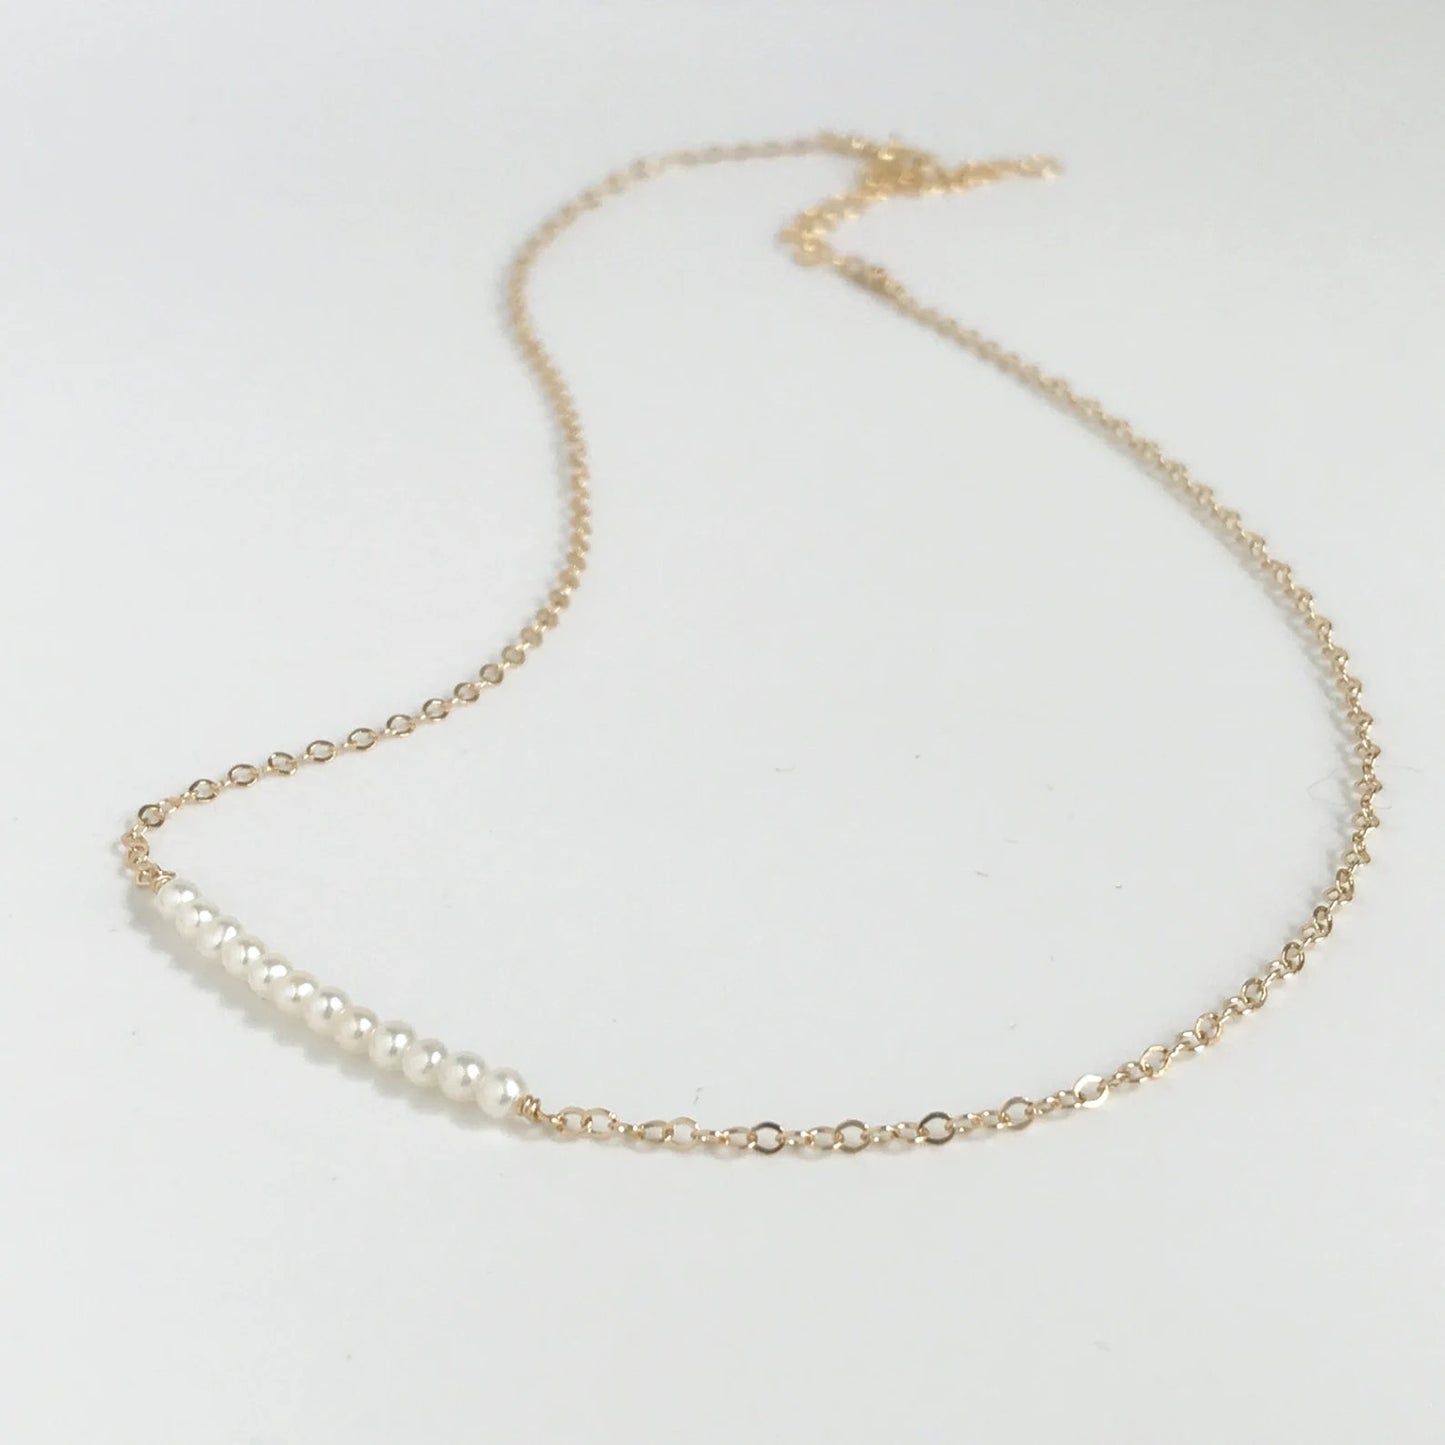 Dainty Pearl Necklace - Silver, Gold or Rose Gold Pearl Necklace